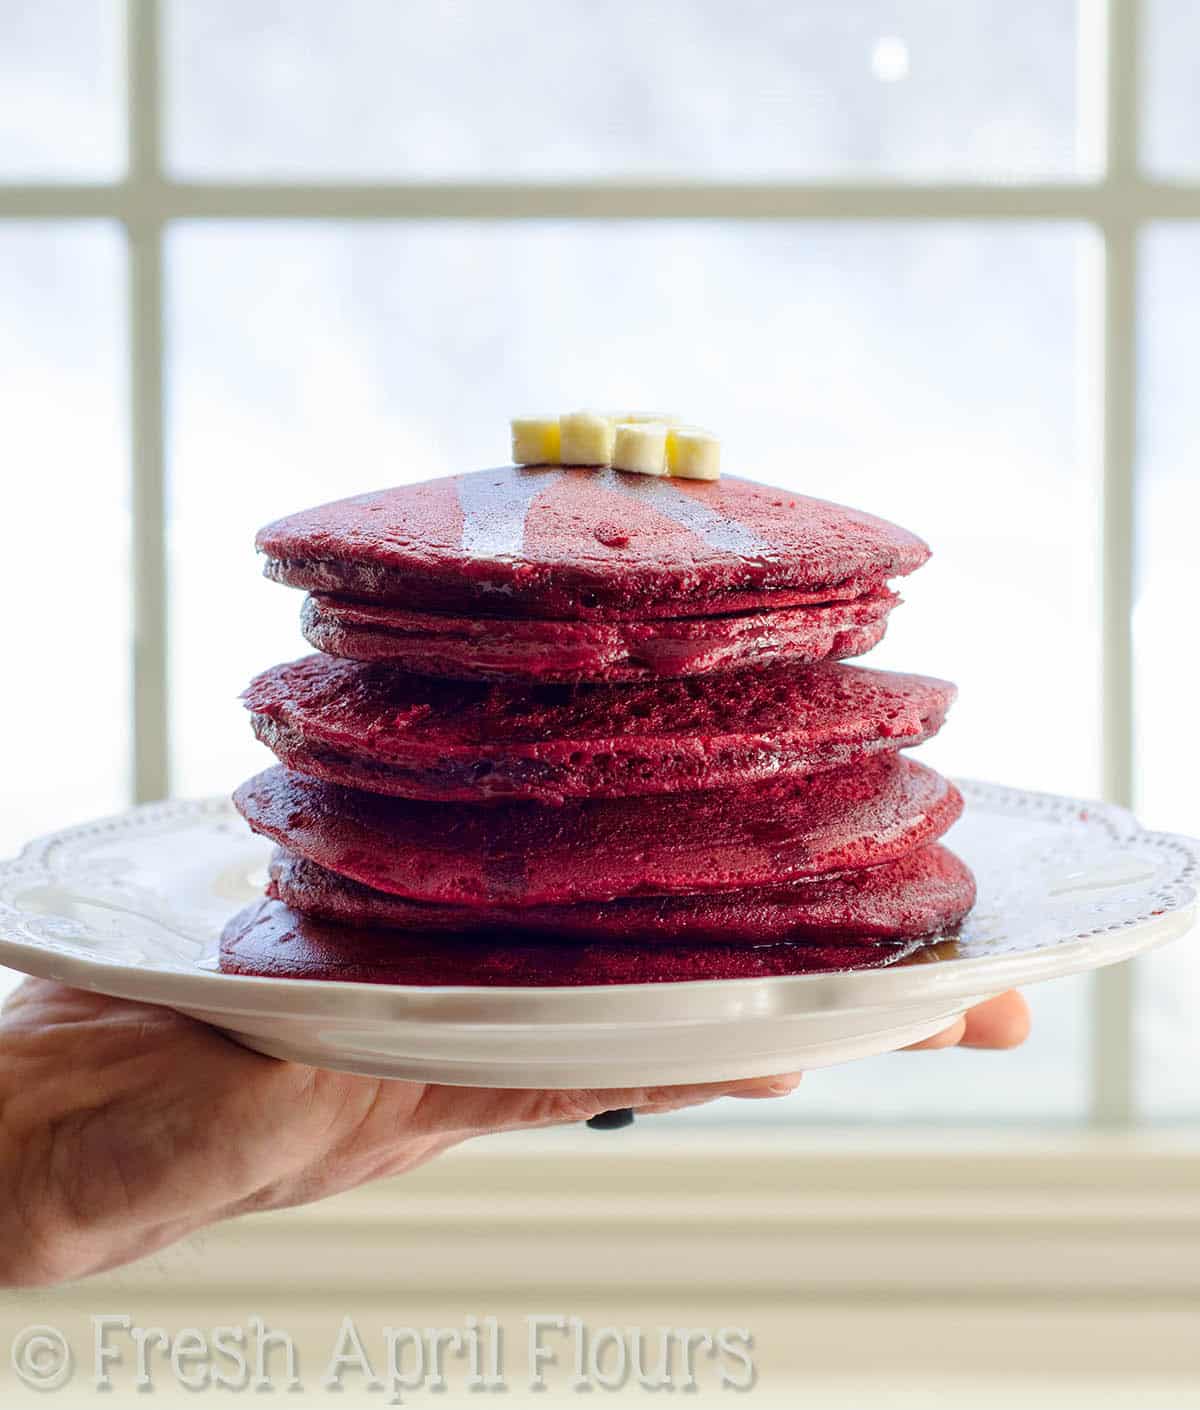 A hand holding a plate of a stack of red velvet pancakes.